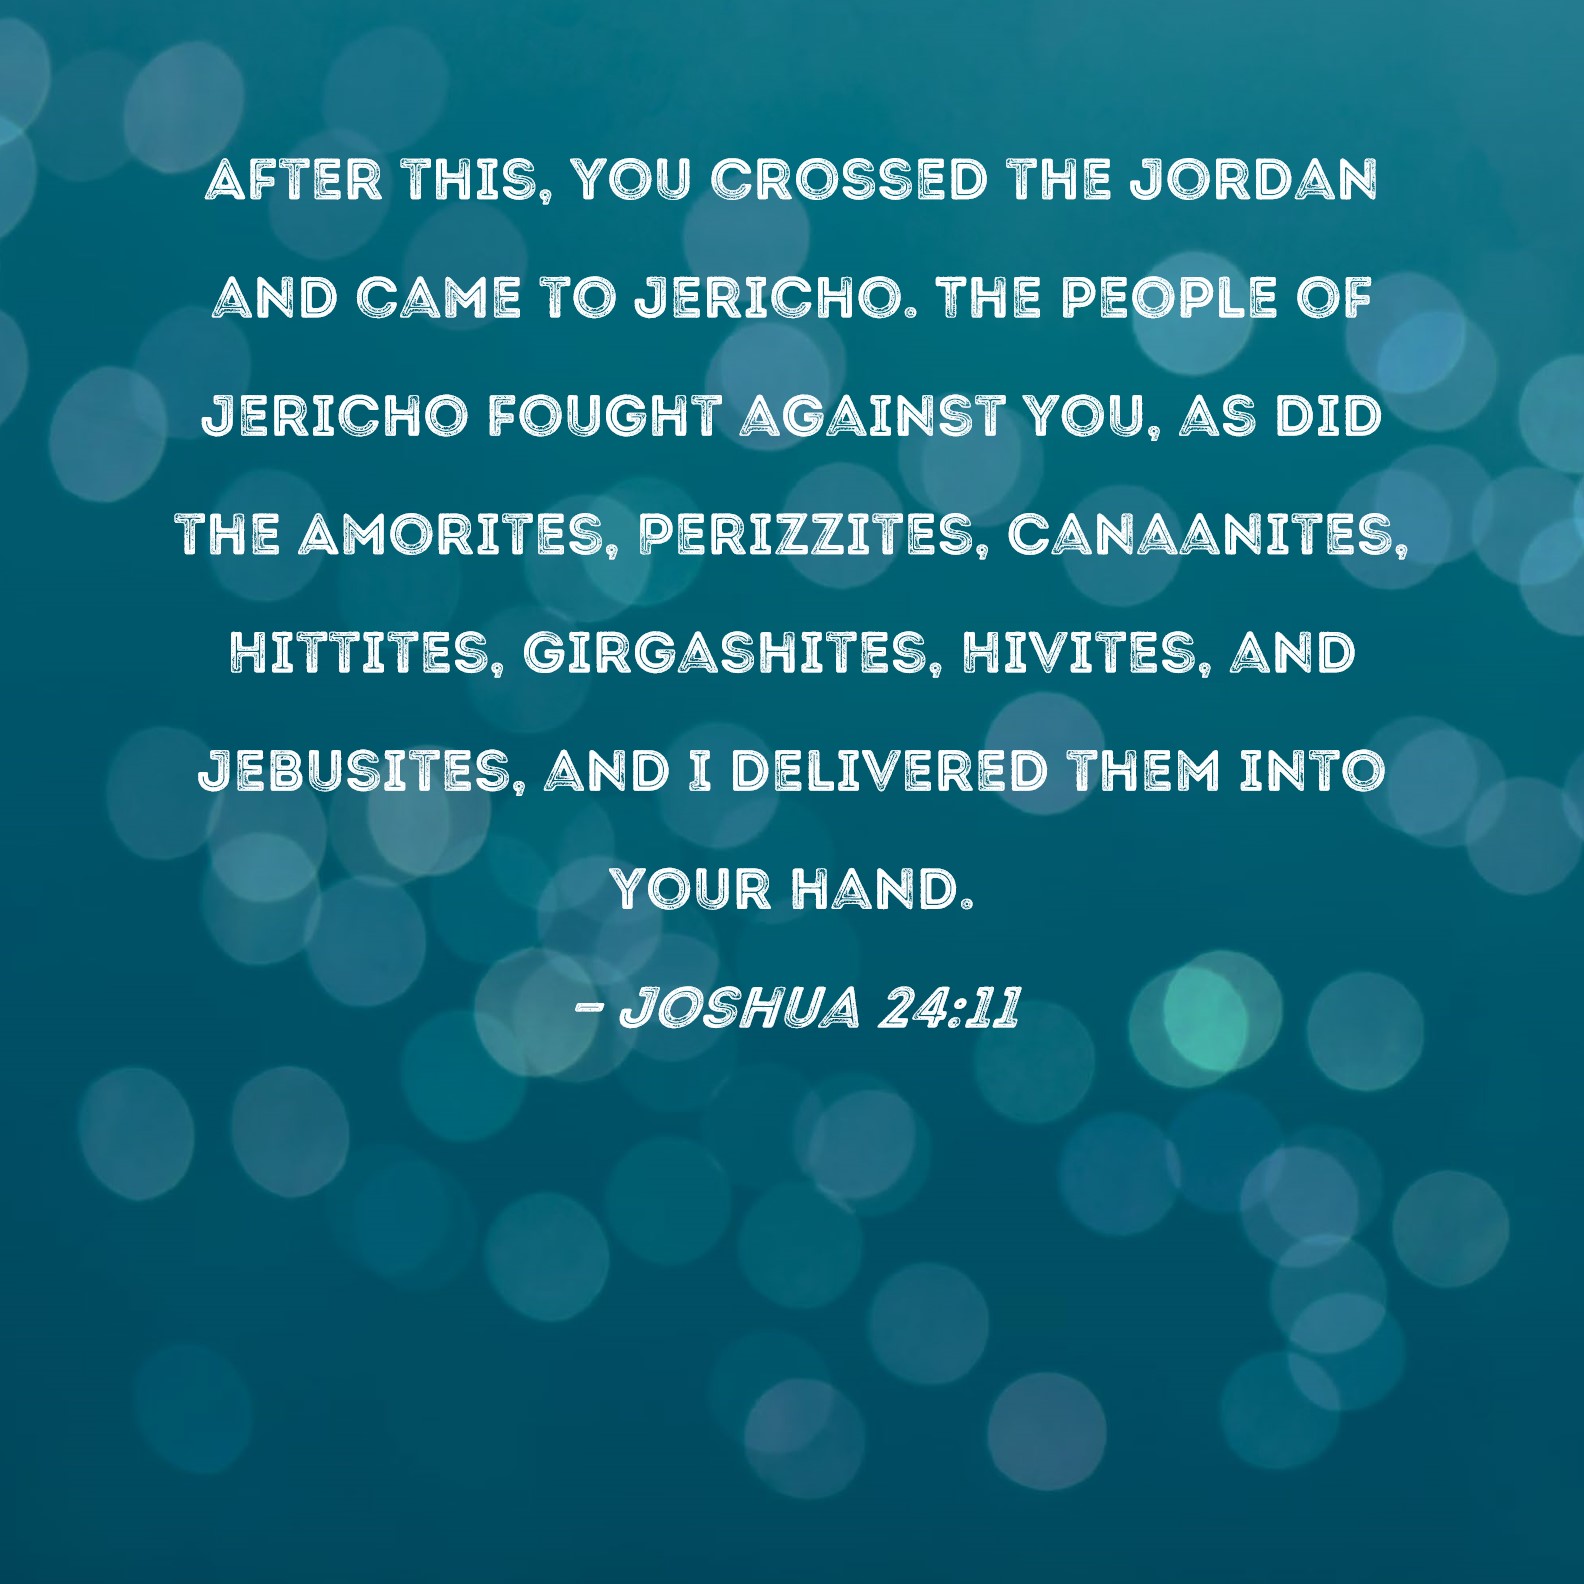 Joshua 2411 After this, you crossed the Jordan and came to Jericho